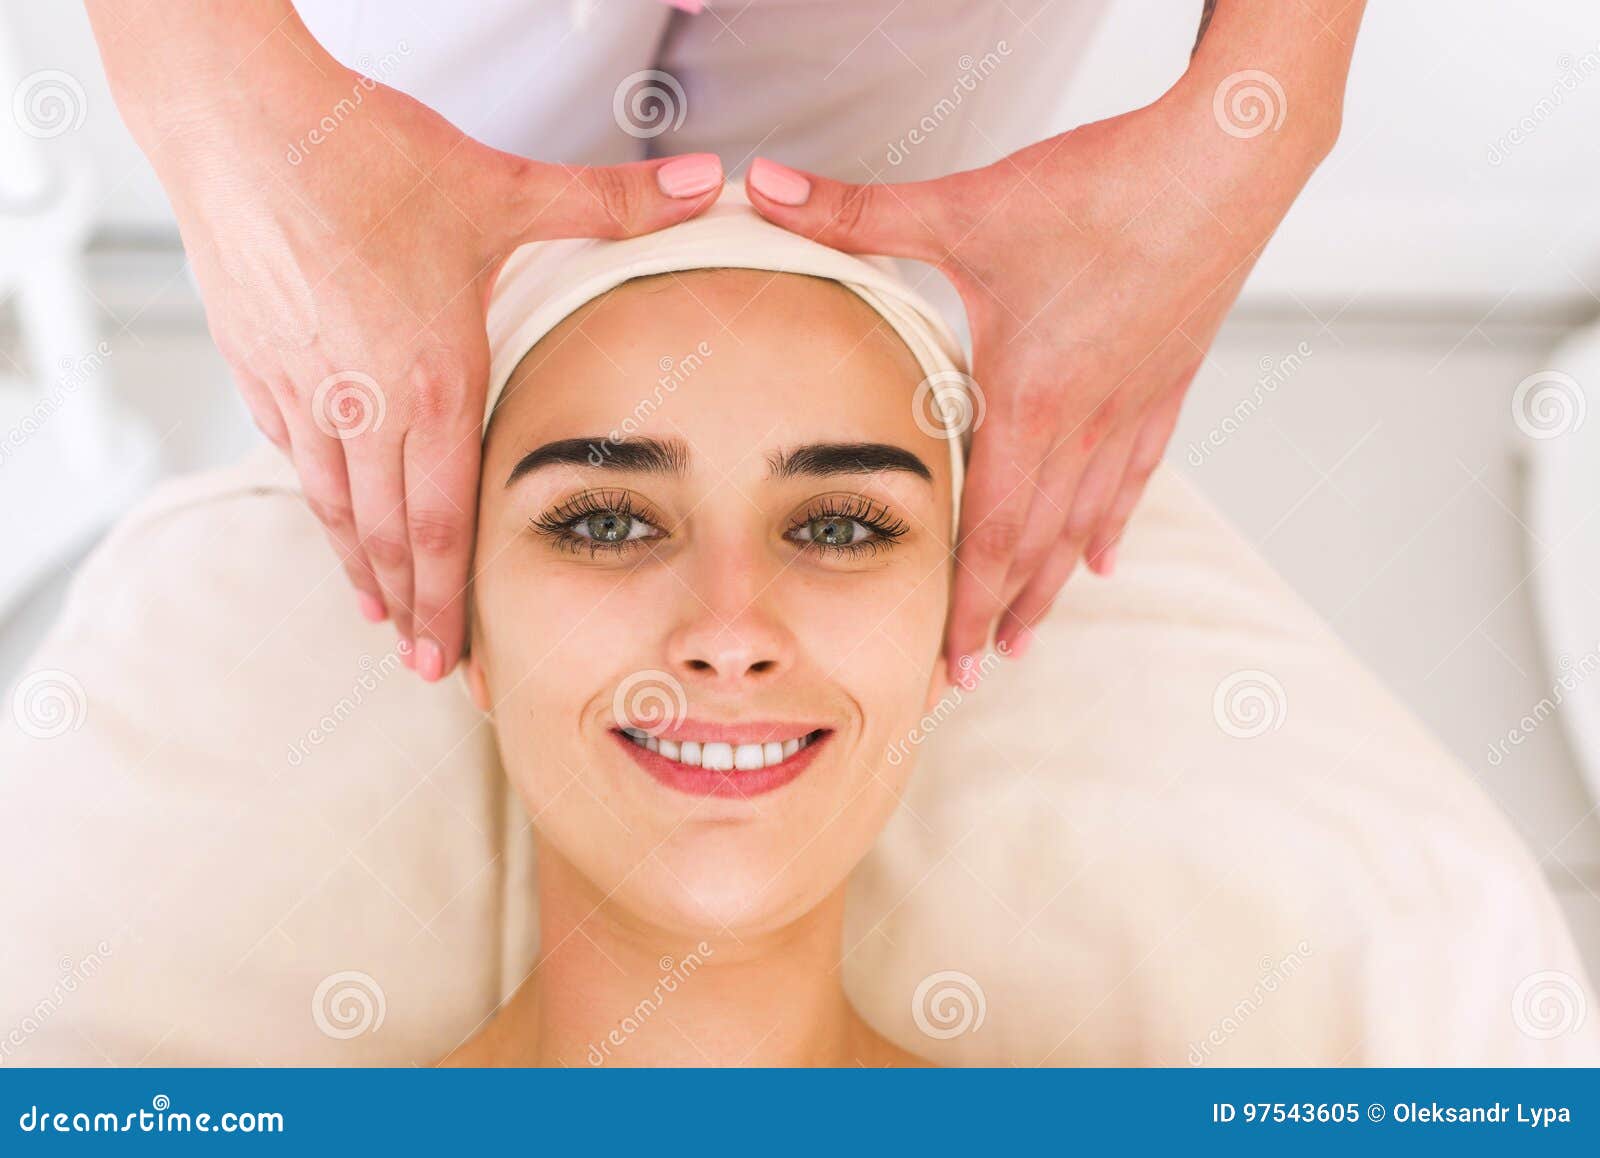 Young Woman Receiving A Head Massage Stock Image Image Of Head